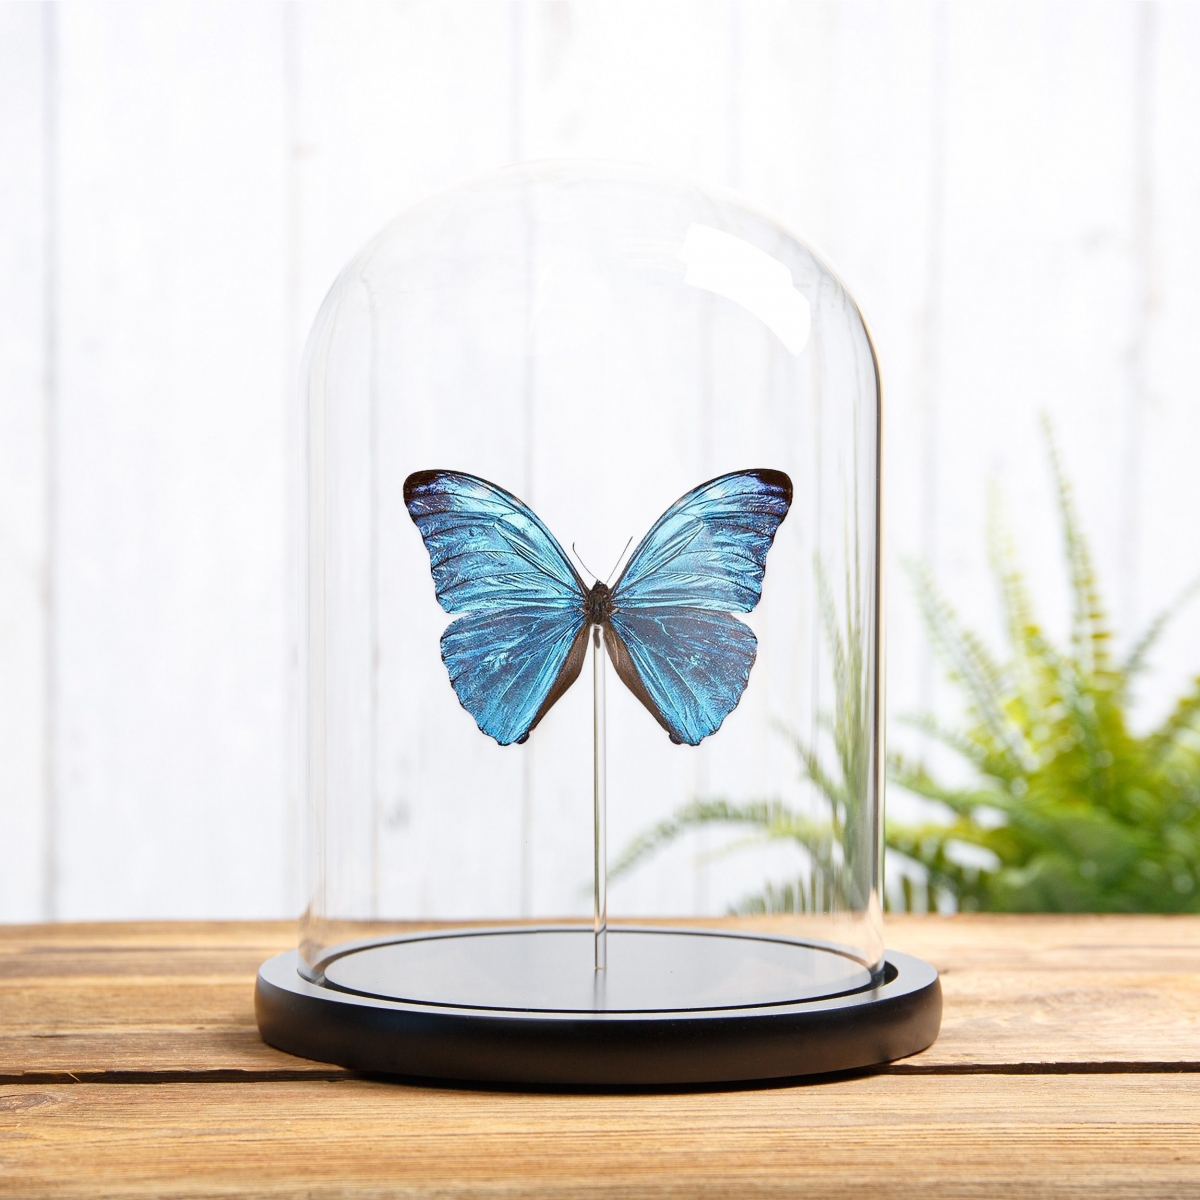 Minibeast Morpho uraneis in Glass Dome with Wooden Base From Brazil